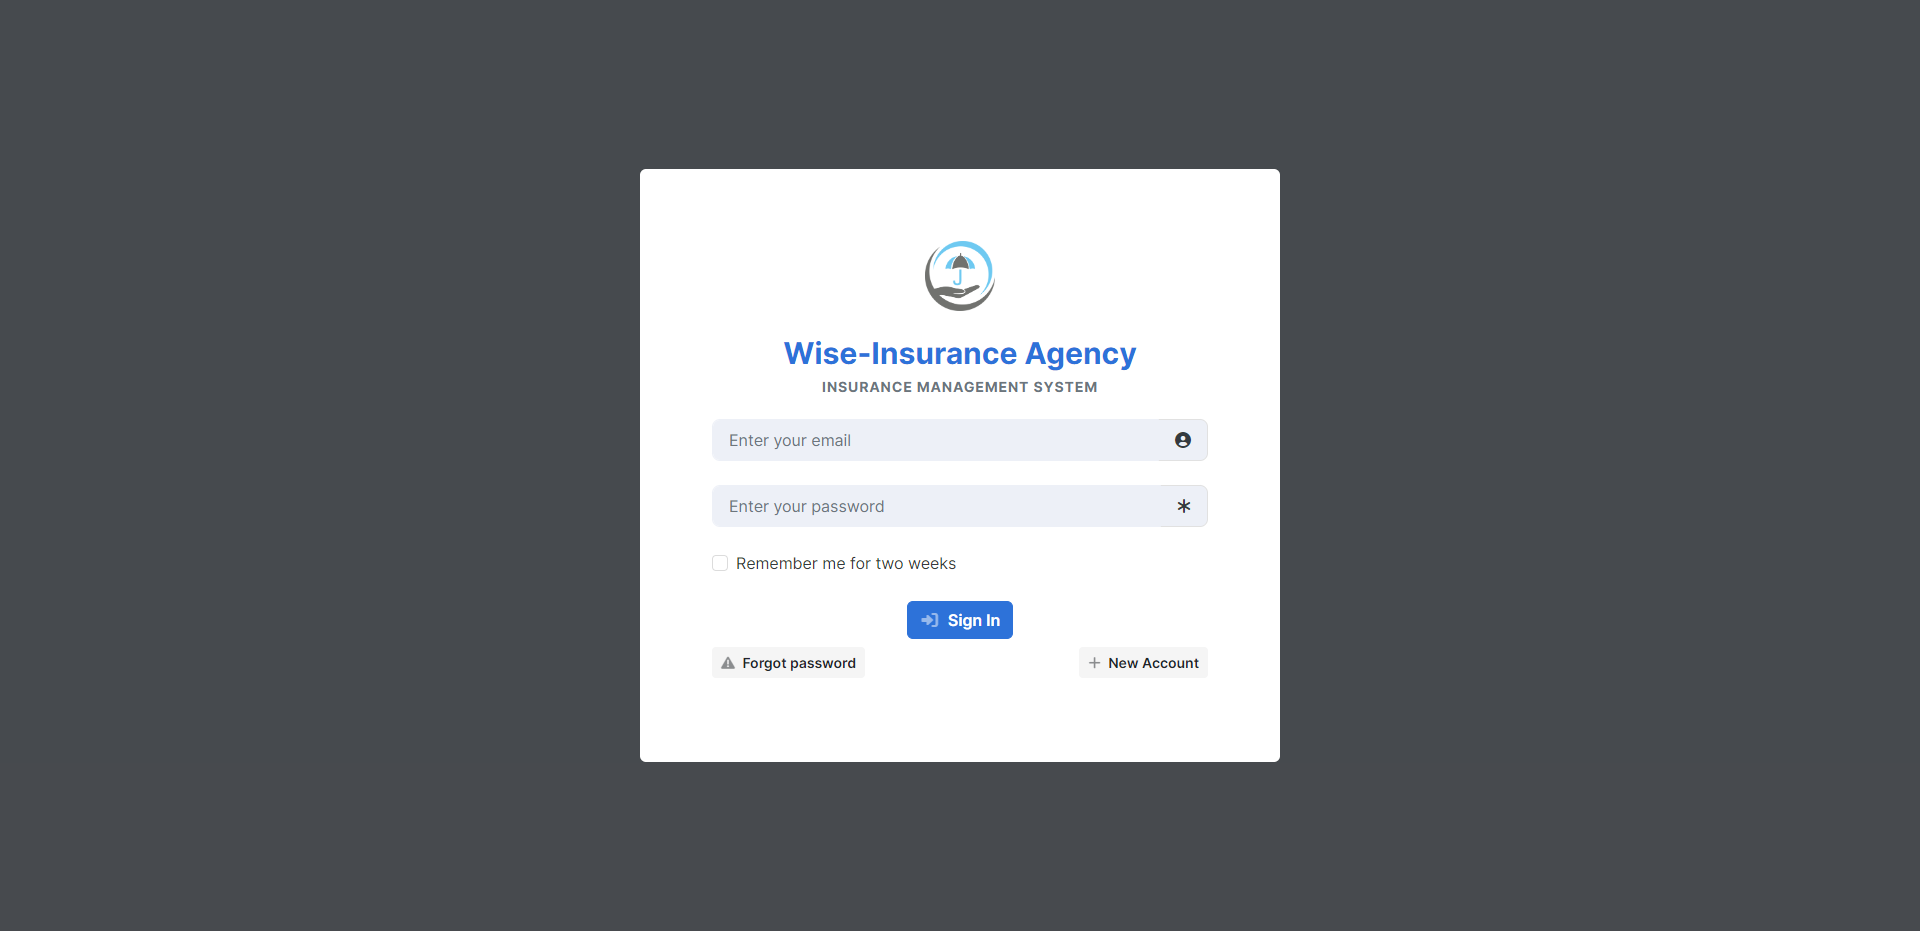 Insurance Management System in PHP and MySQL